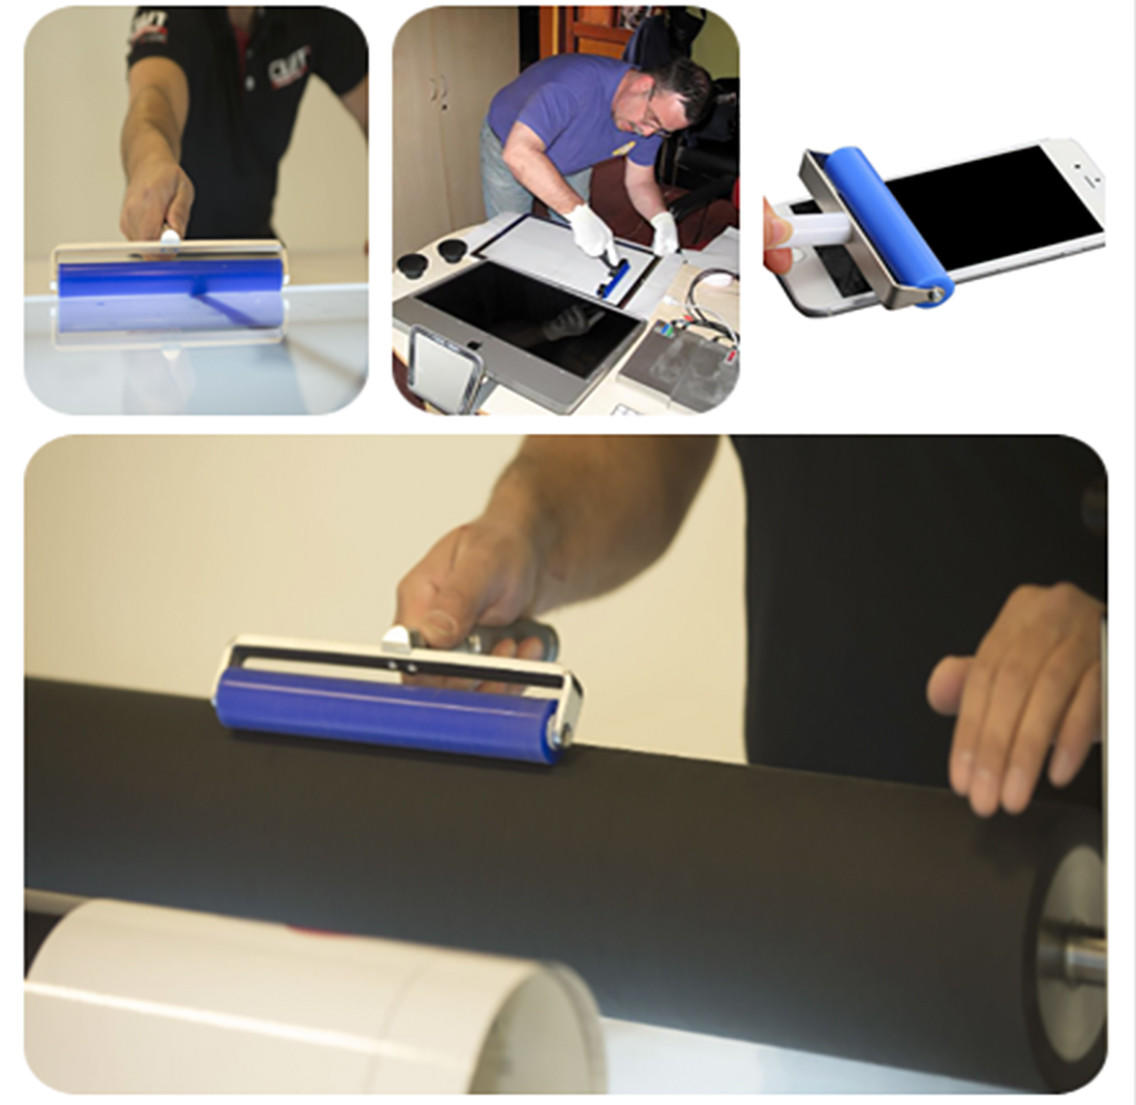 cost-effective silicone roller silicone with aluminum alloy wholesale for computer screen